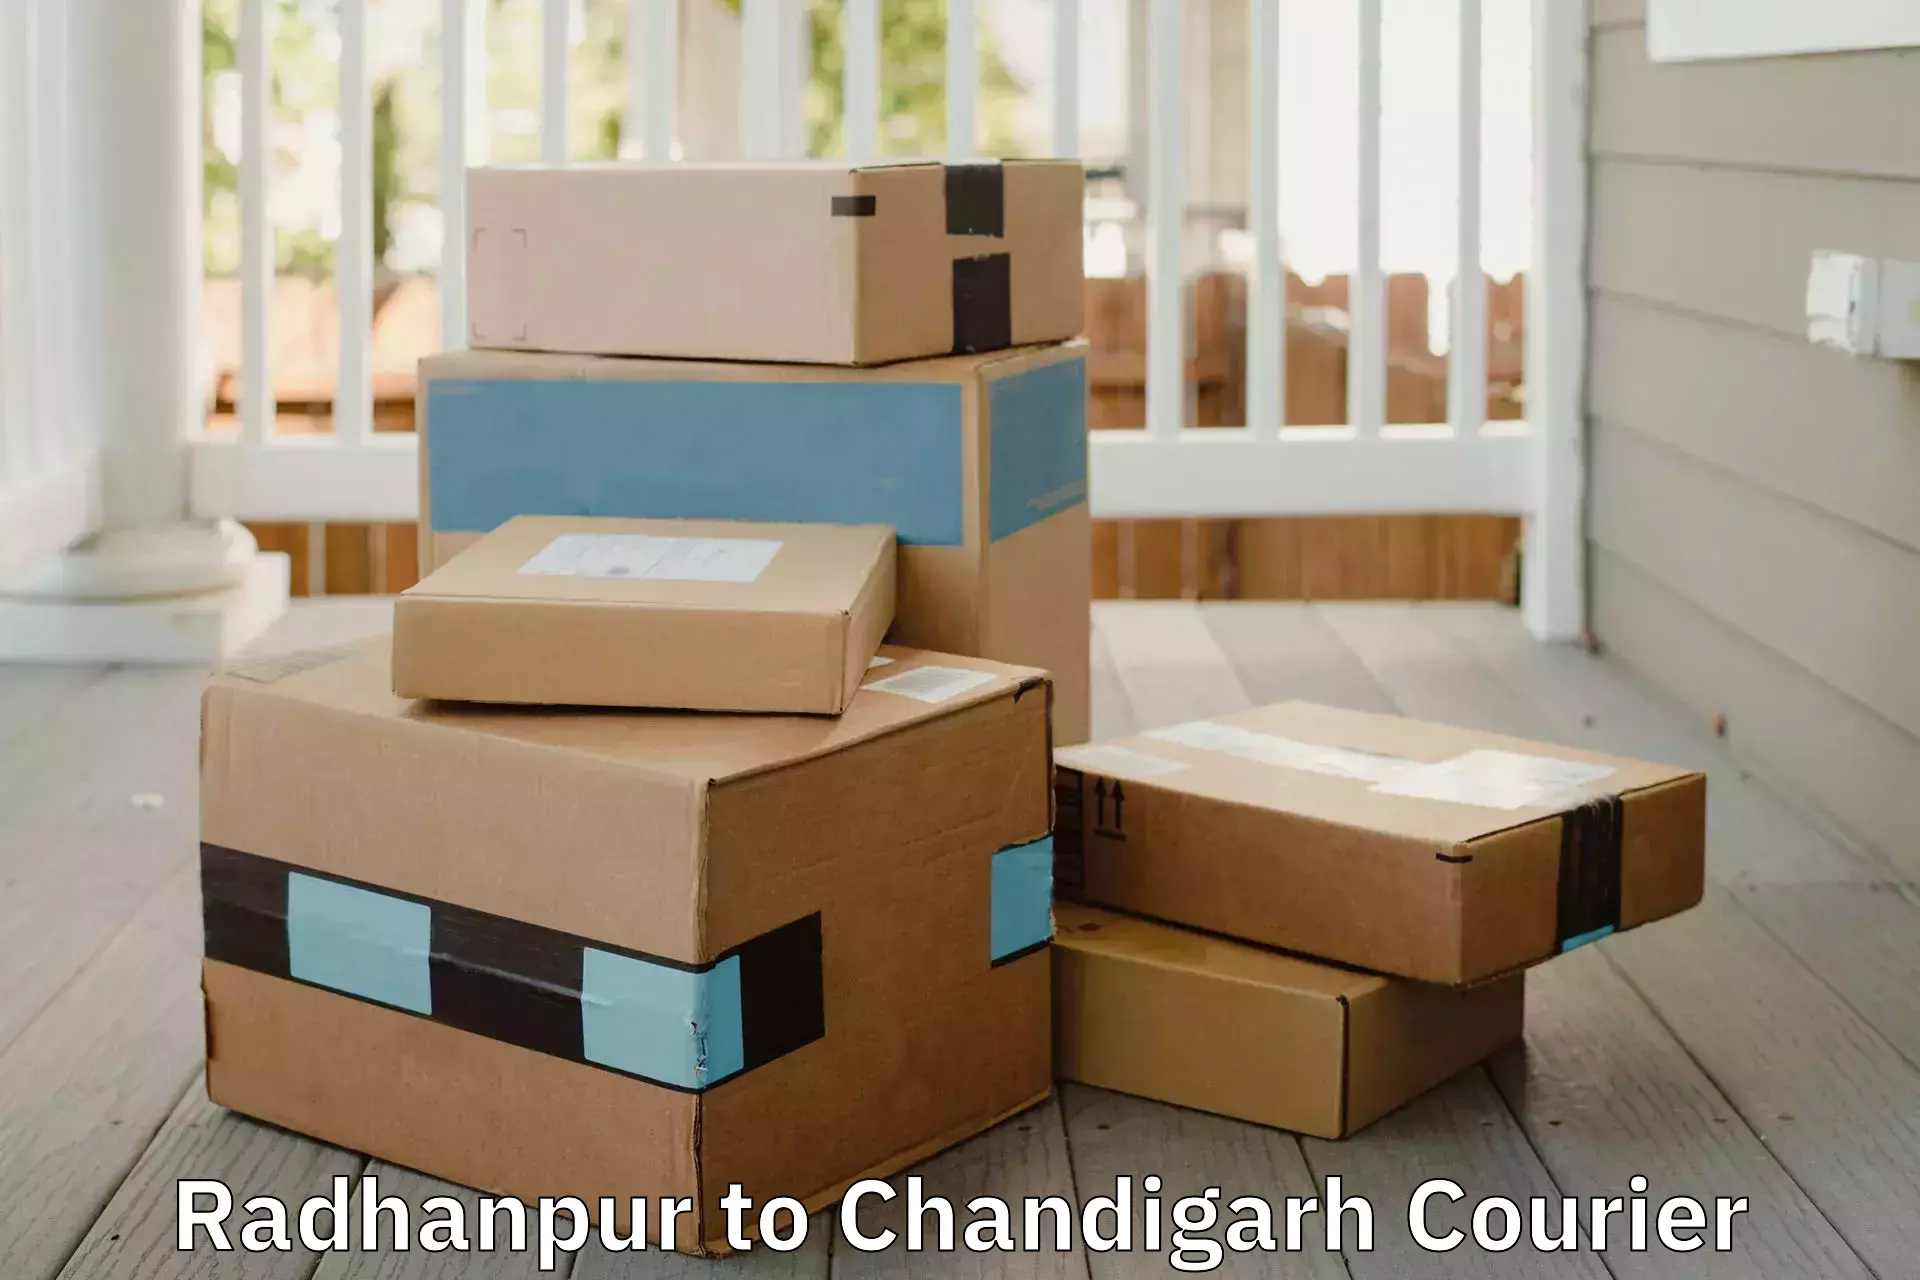 Quality moving services Radhanpur to Chandigarh